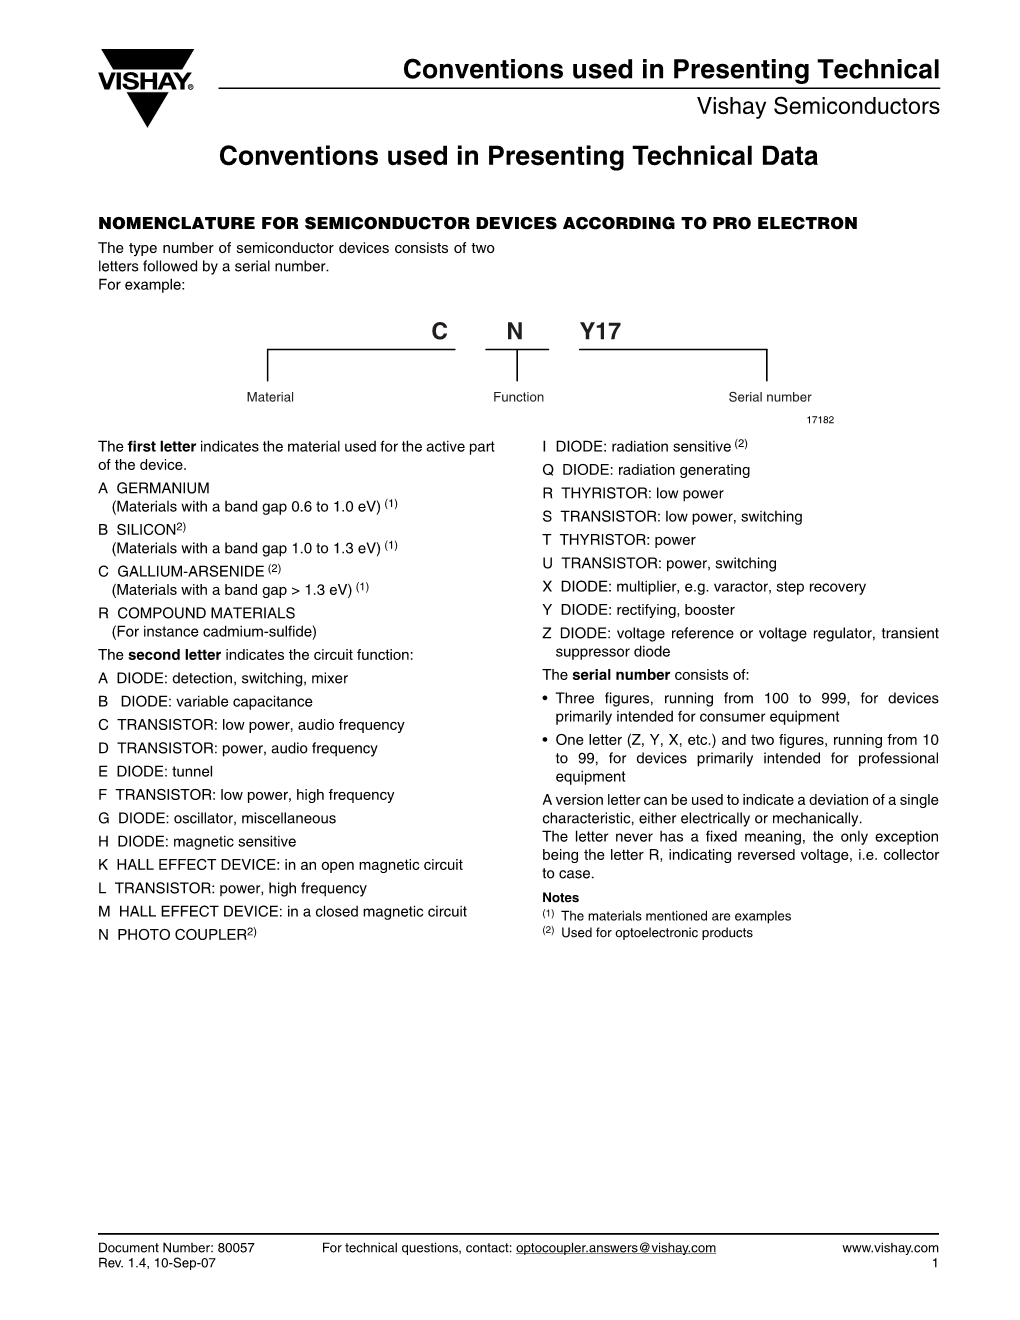 Conventions Used in Presenting Technical Data